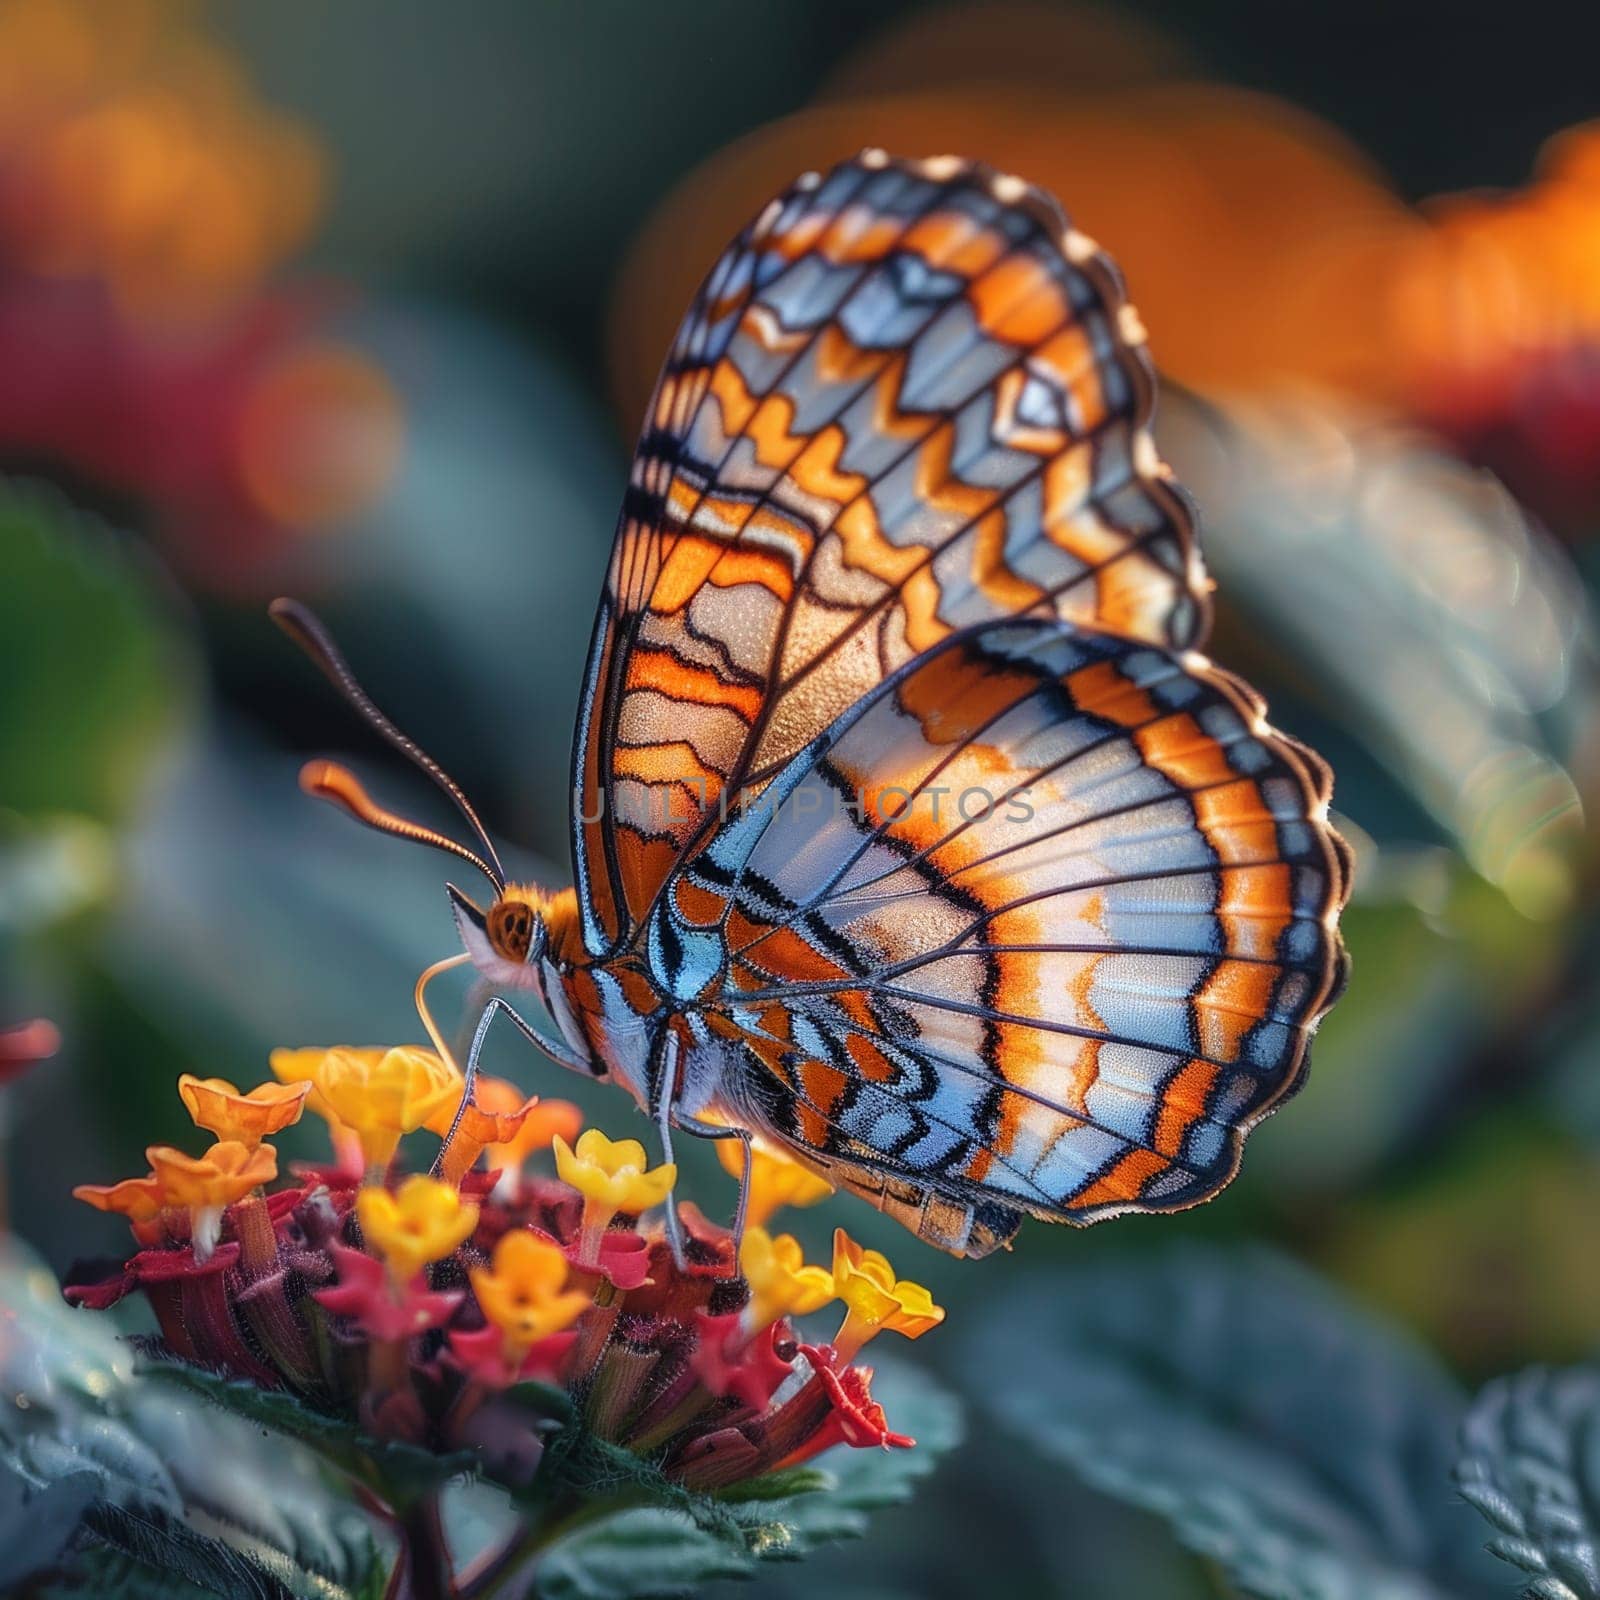 A stunning butterfly delicately rests on a vibrant flower, showcasing the intricate beauty of natures creatures.